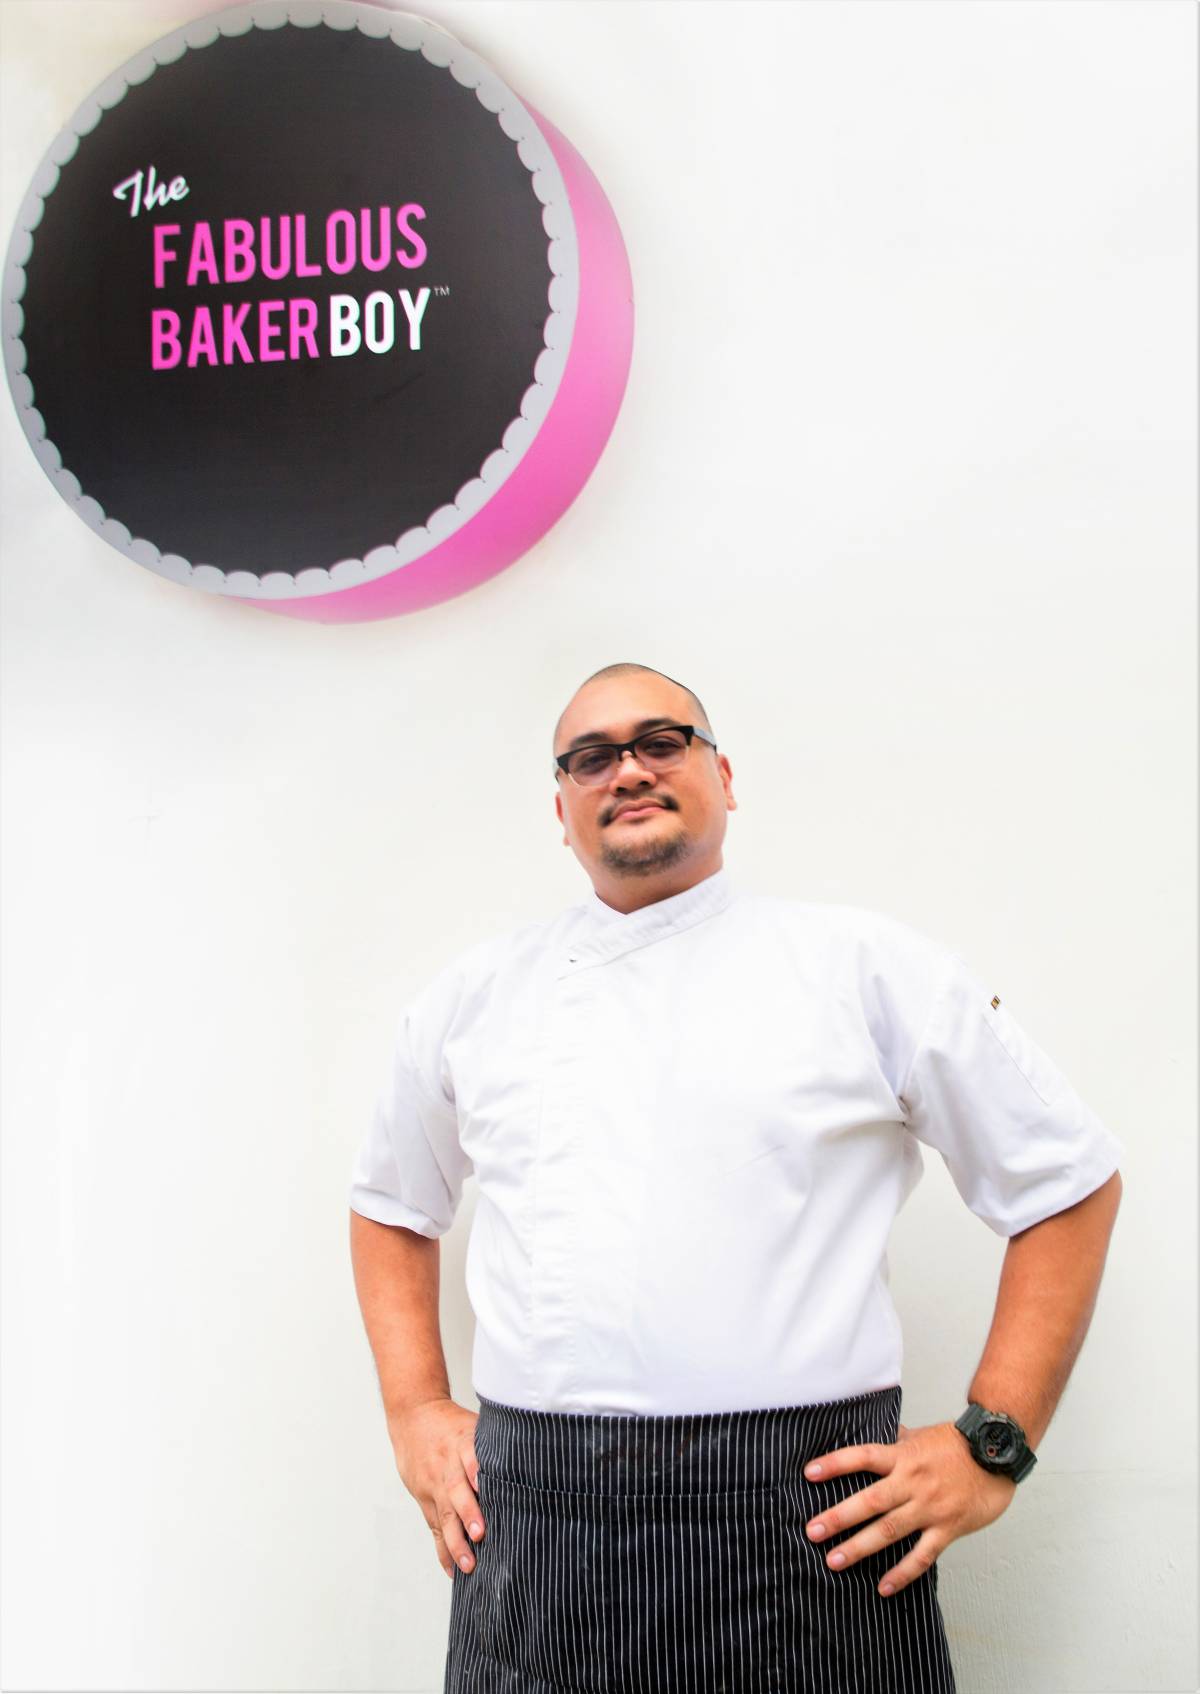 Just How Fabulous is that Baker Boy!  